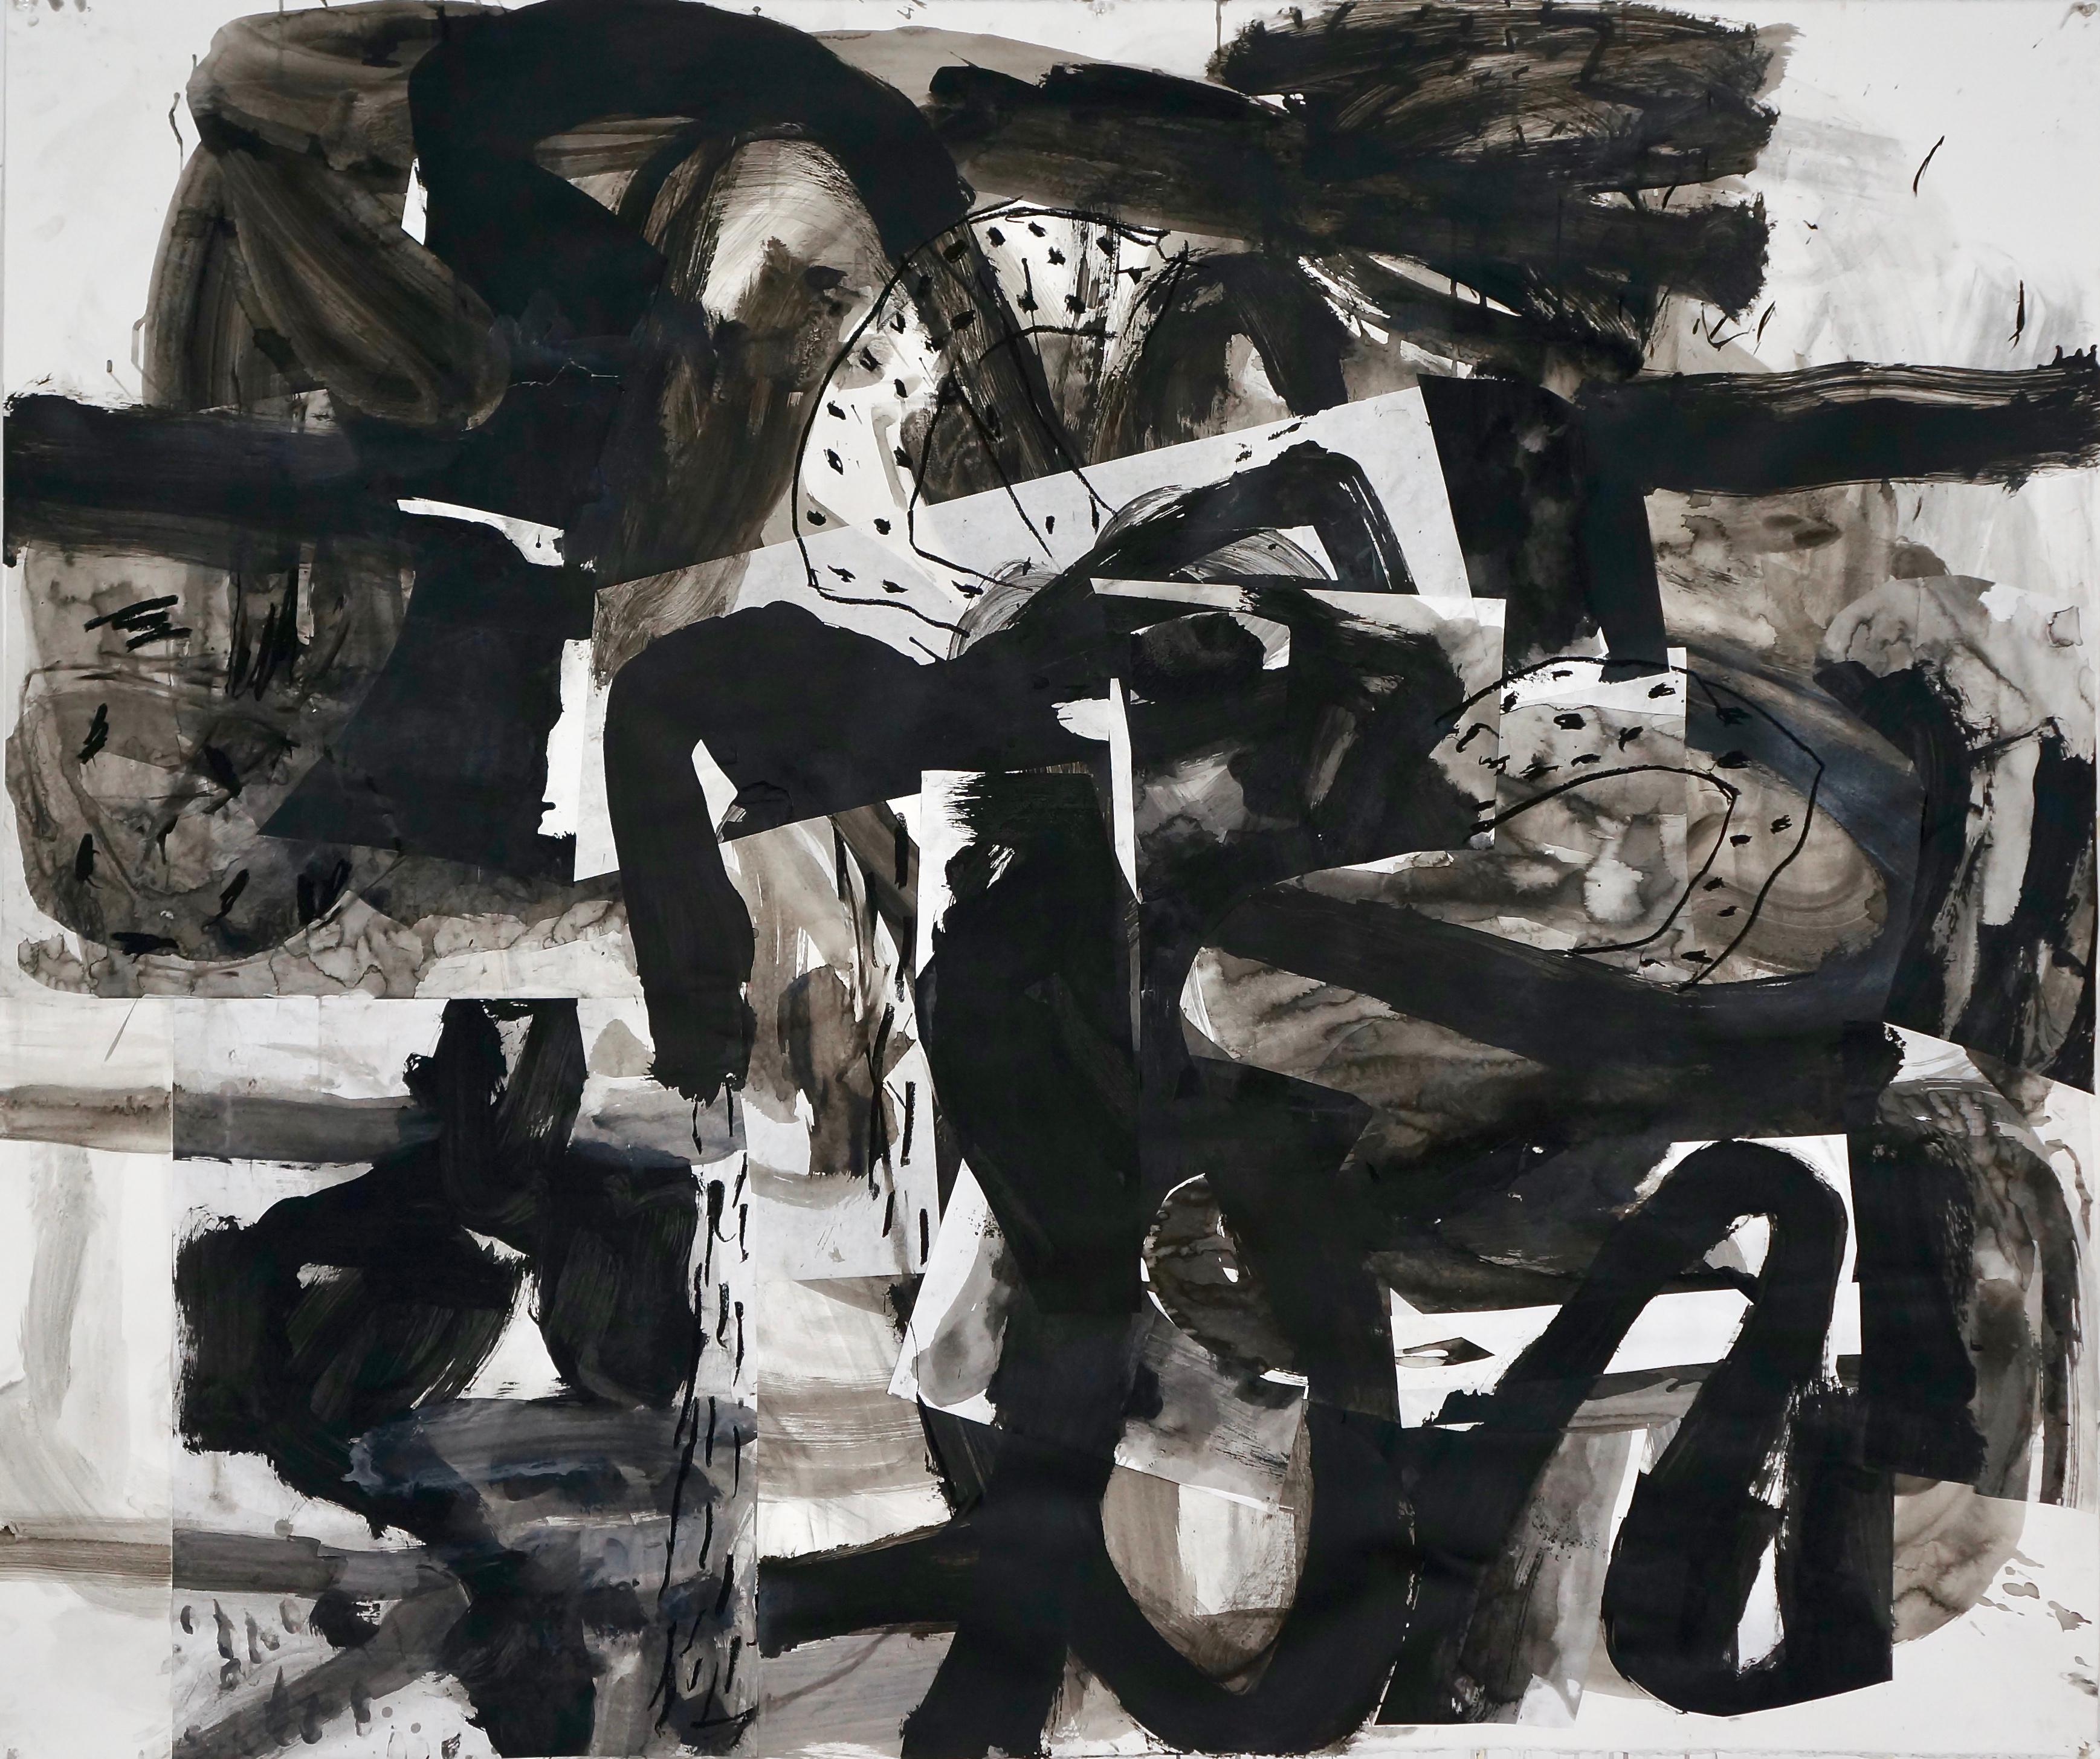 "Composition V, " Mixed Media on Paper - Black and White Collage Painting - Mixed Media Art by Alfredo Gisholt